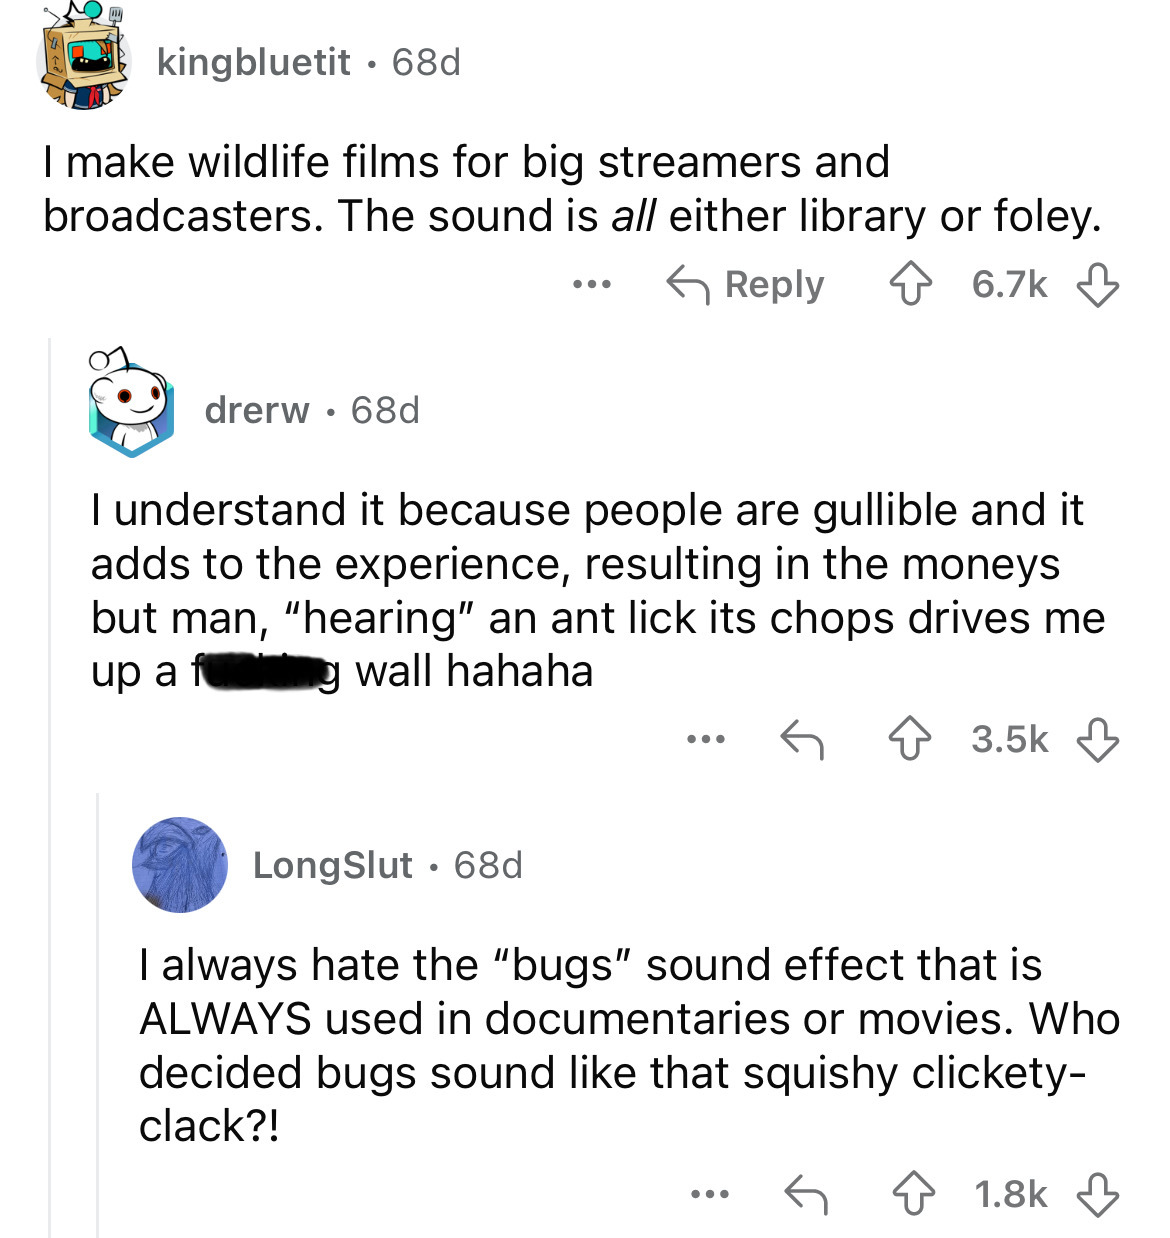 document - kingbluetit 68d I make wildlife films for big streamers and broadcasters. The sound is all either library or foley. drerw. 68d ... I understand it because people are gullible and it adds to the experience, resulting in the moneys but man, "hear